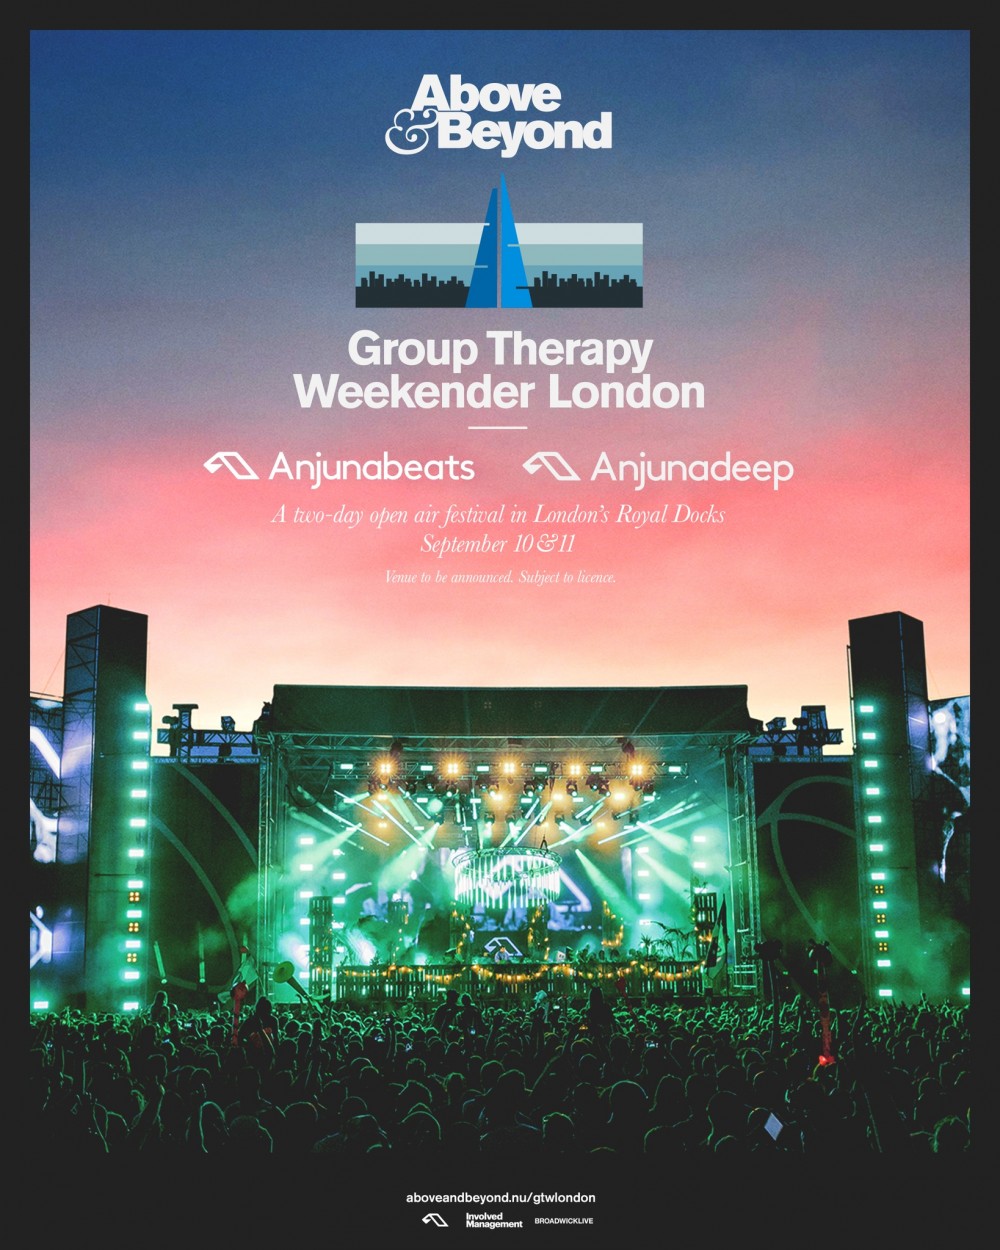 Group Therapy Weekender Event Announced at Brand New Outdoor London Venue